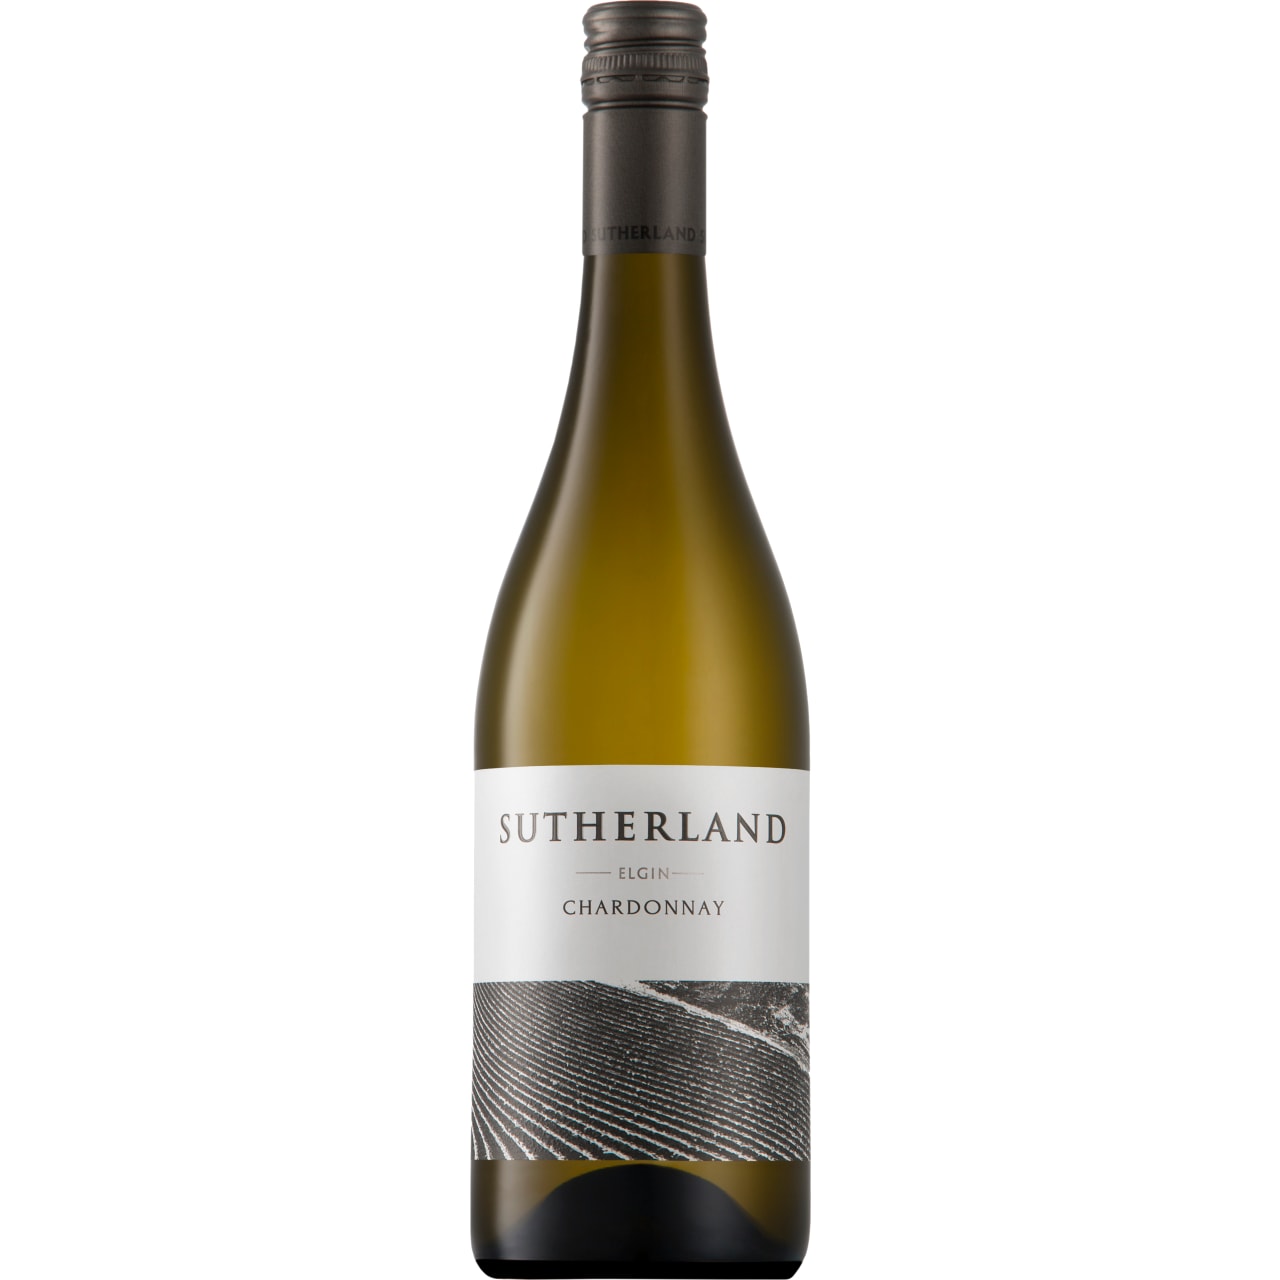 Masterfully nuanced Chardonnay that is great to drink now, and it will gain further roundness and complexity over the next 3-5 years. Delicious!